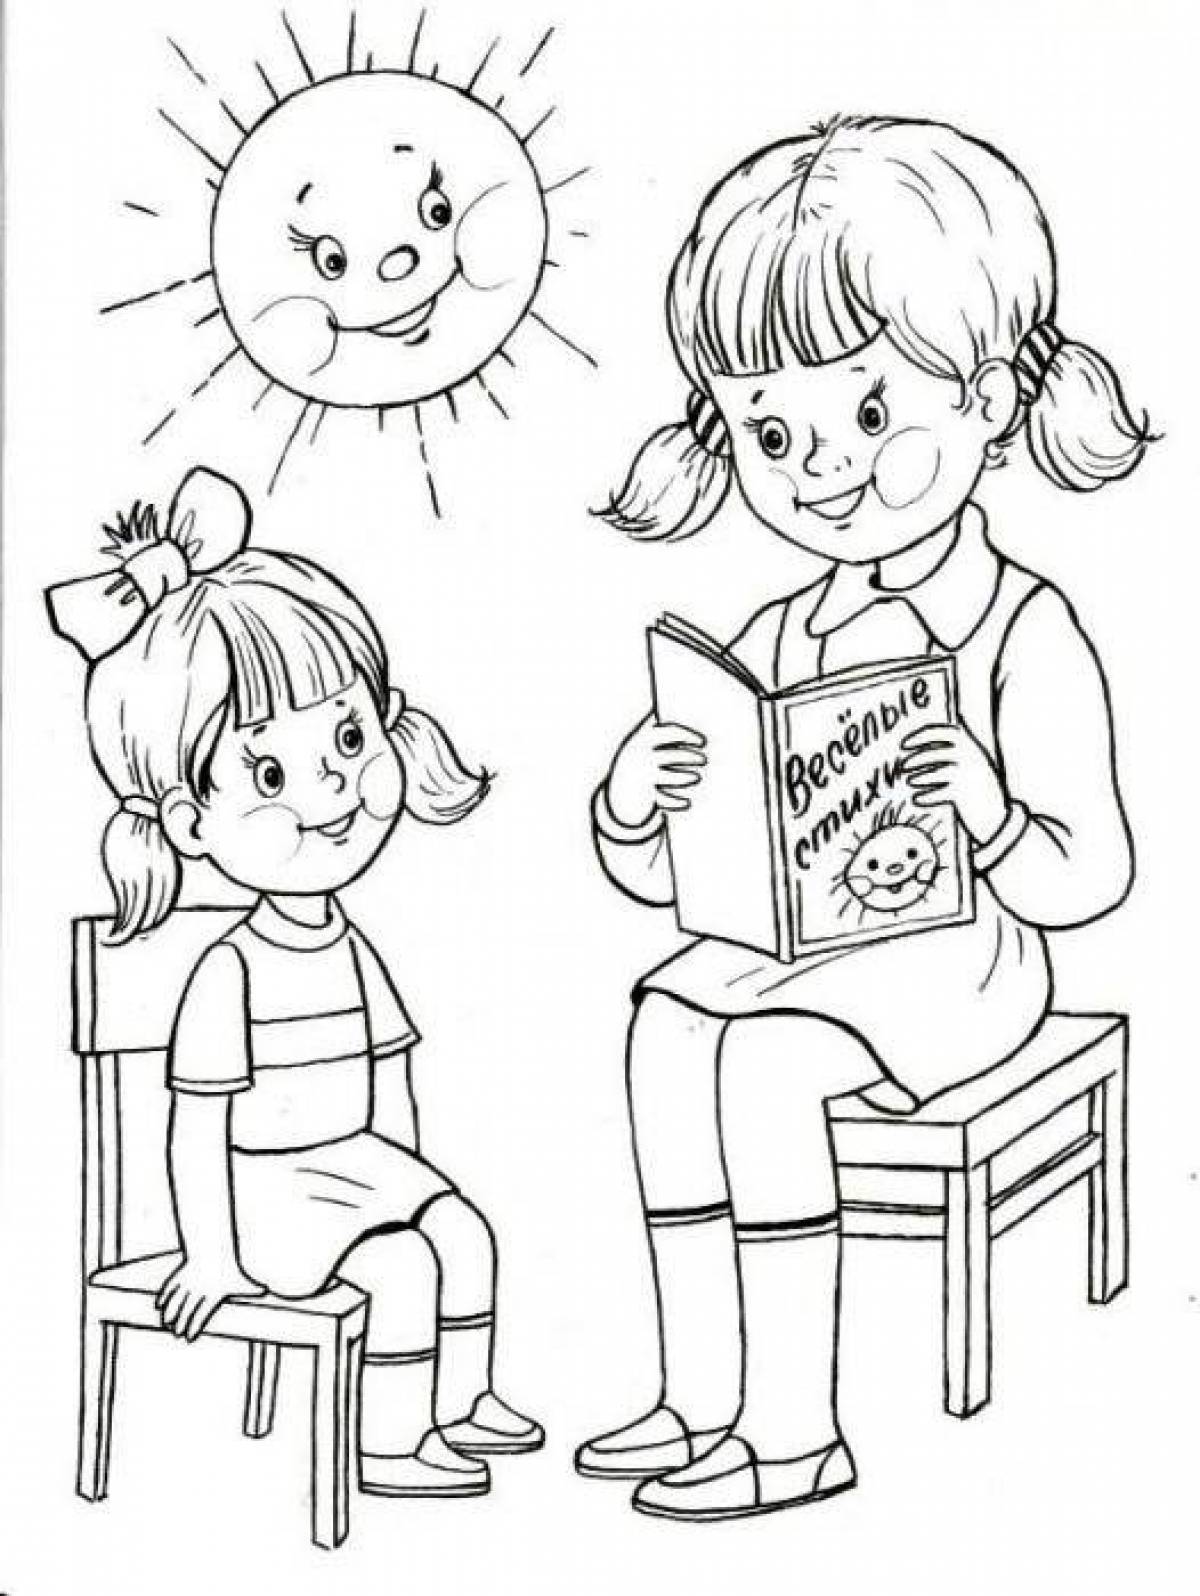 Edge of sweet babys coloring page